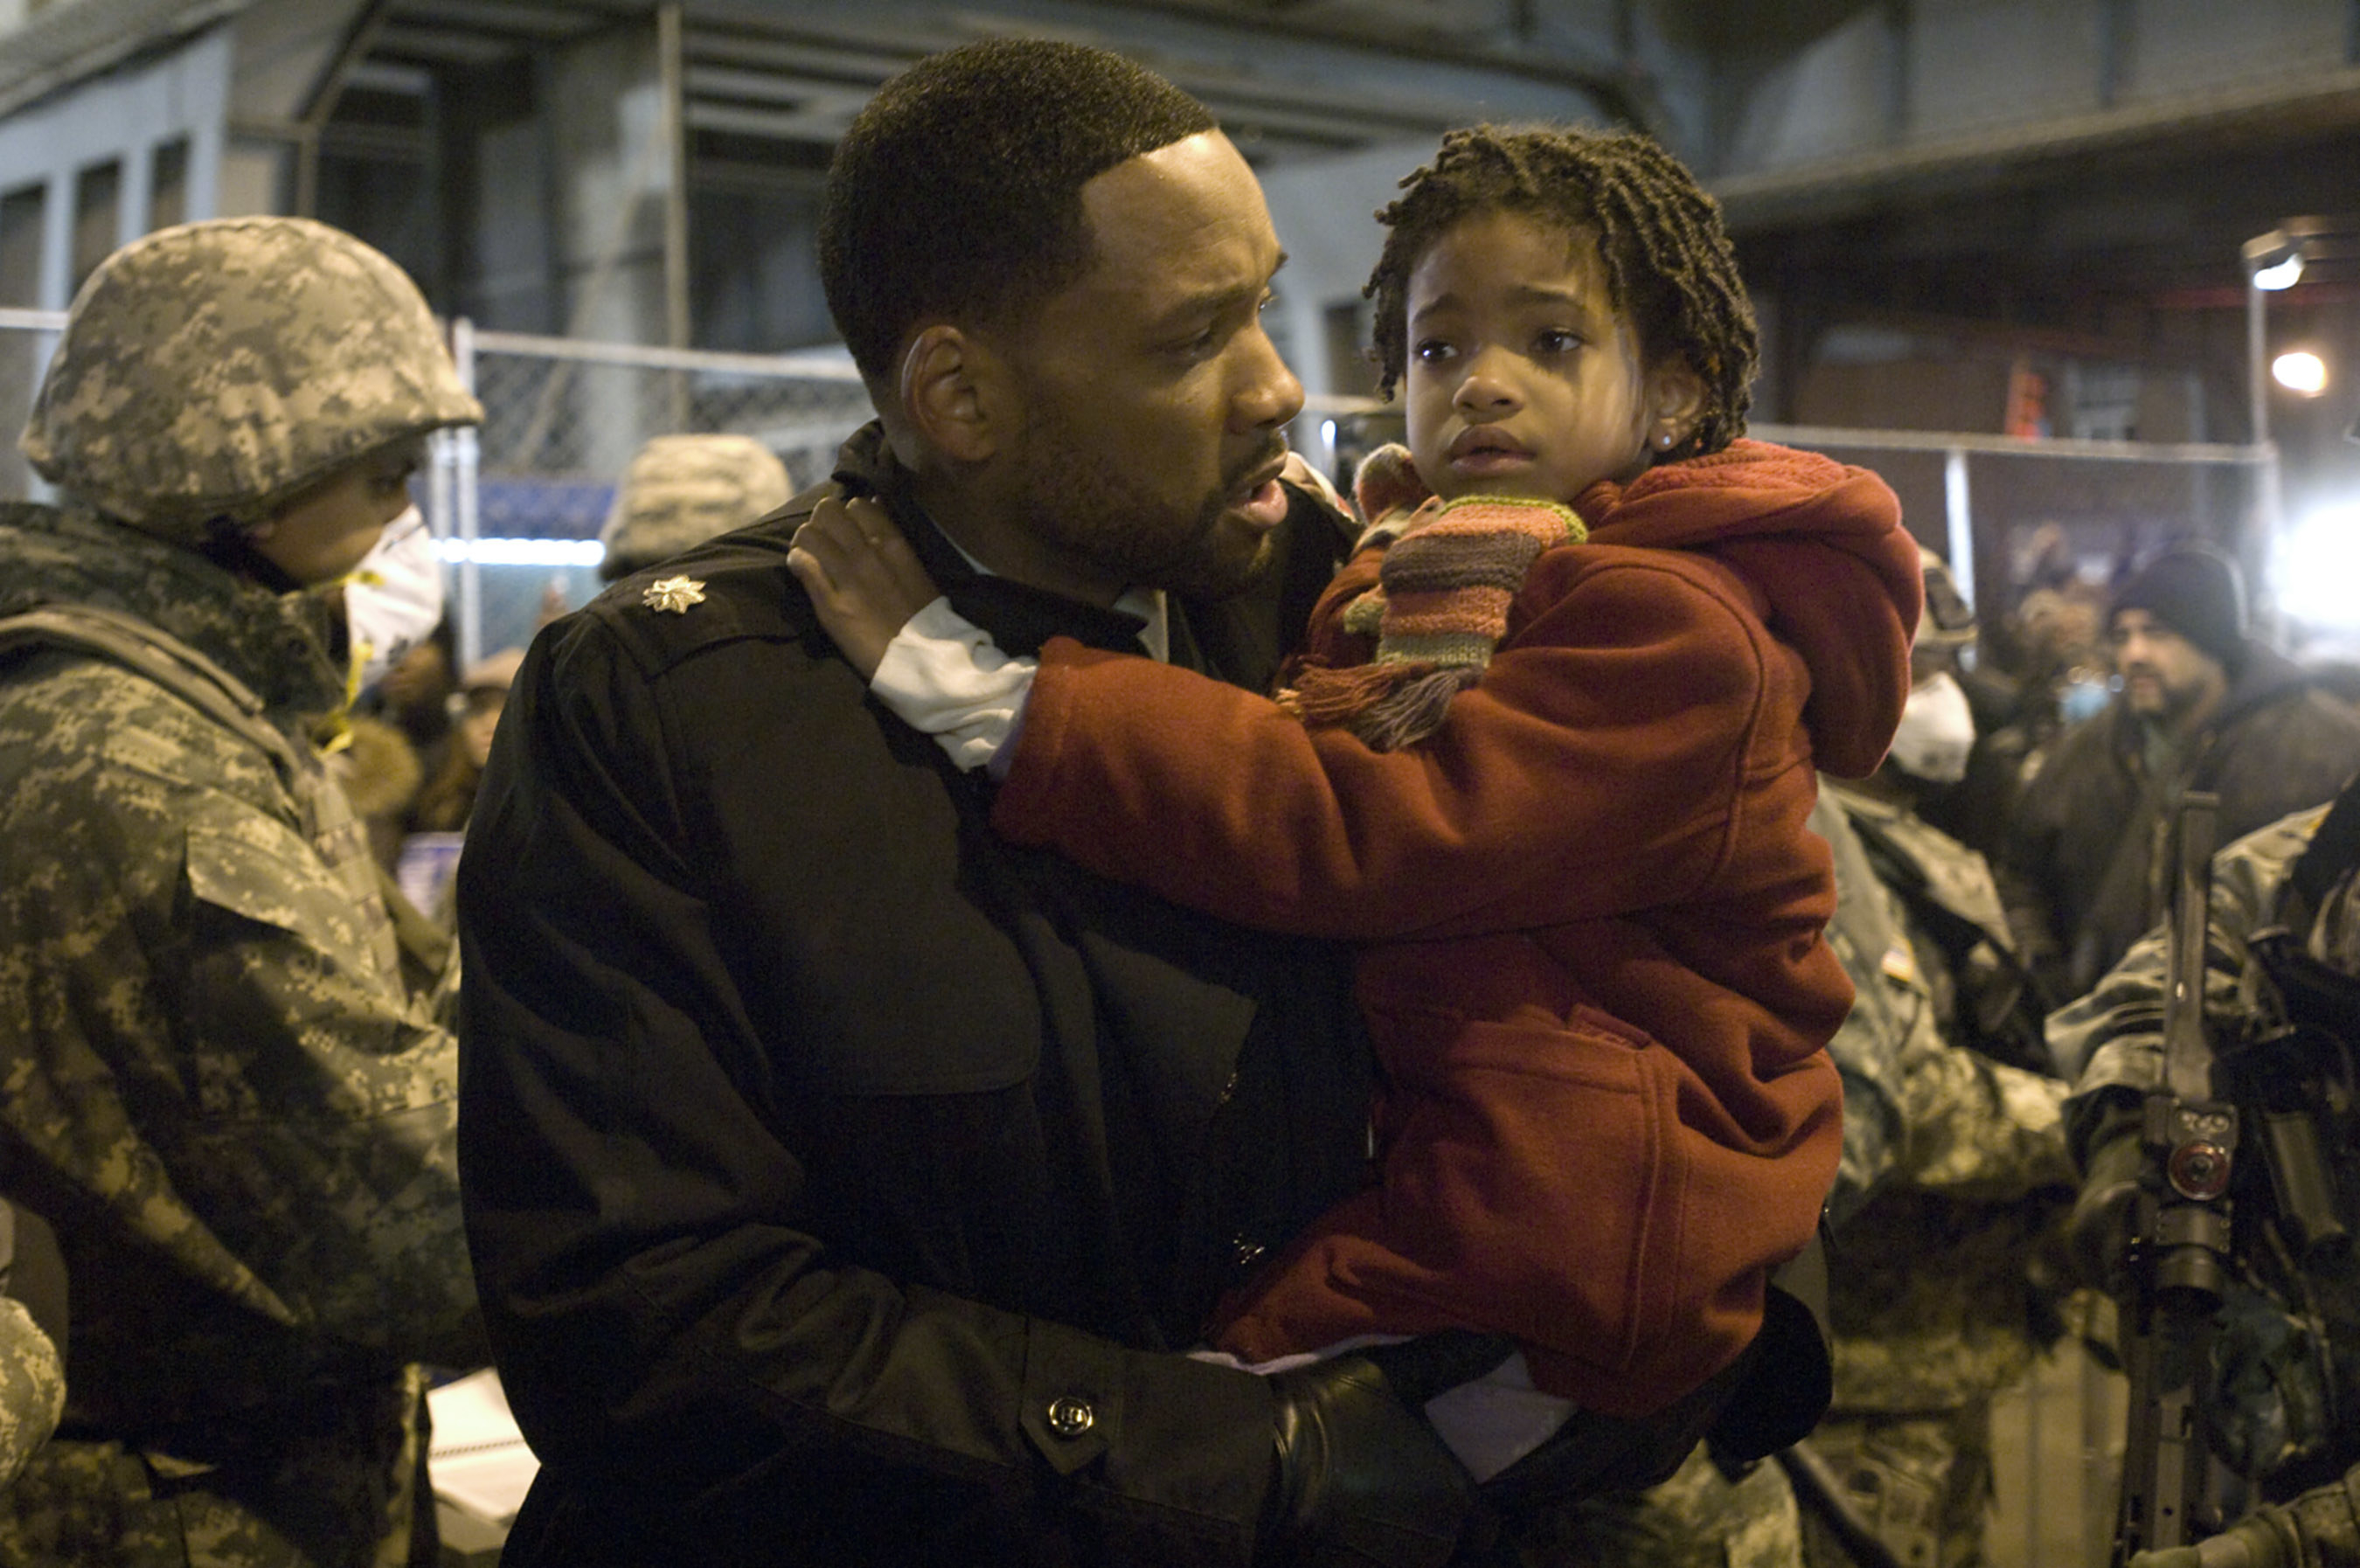 Willow as a child being held by her father, Will Smith